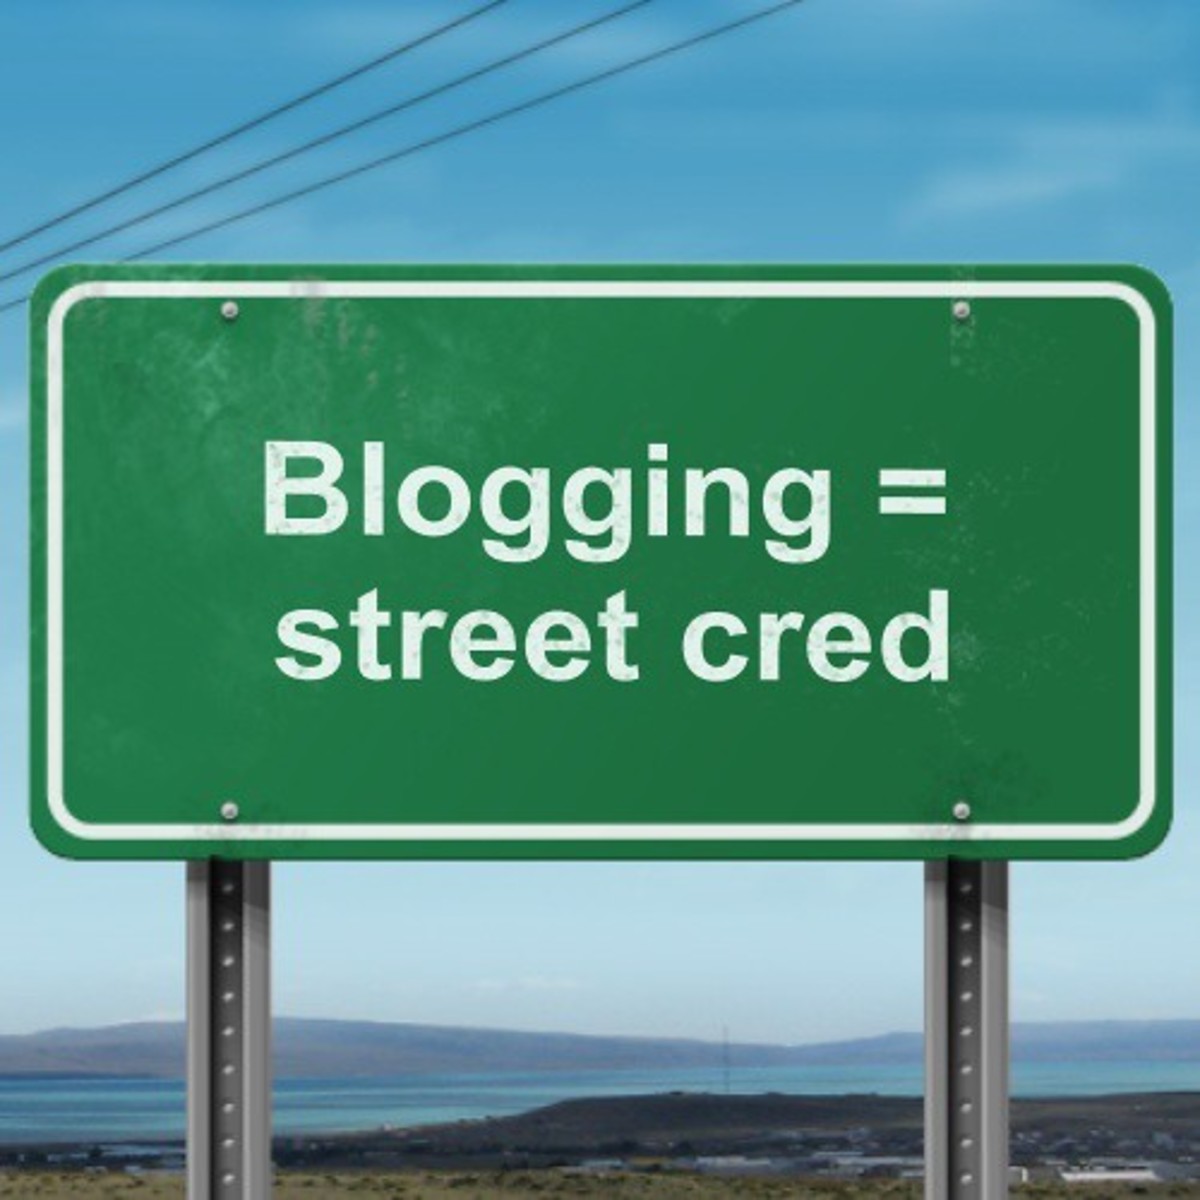 8-ways-blogging-can-help-grow-your-business